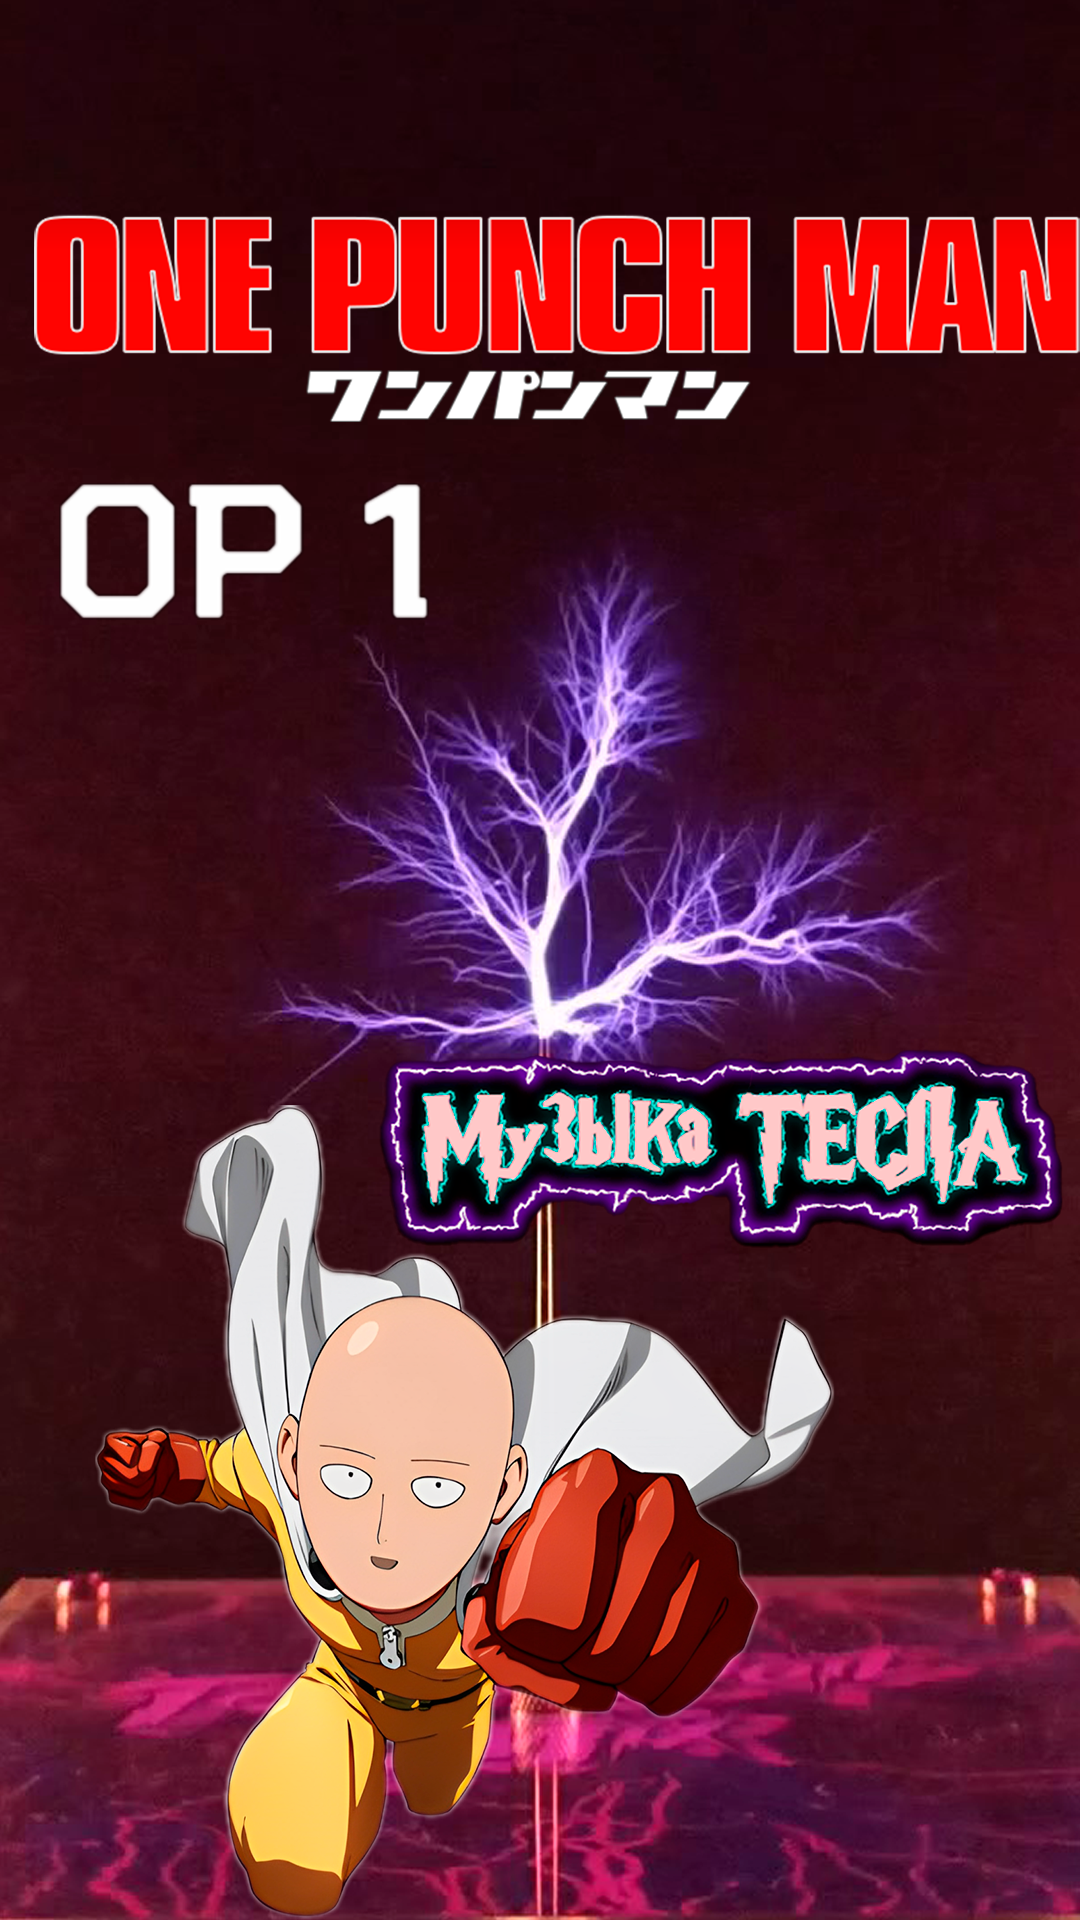 One Punch Man - Opening 1 - The Hero!! Tesla Coil Mix #музыкатесла